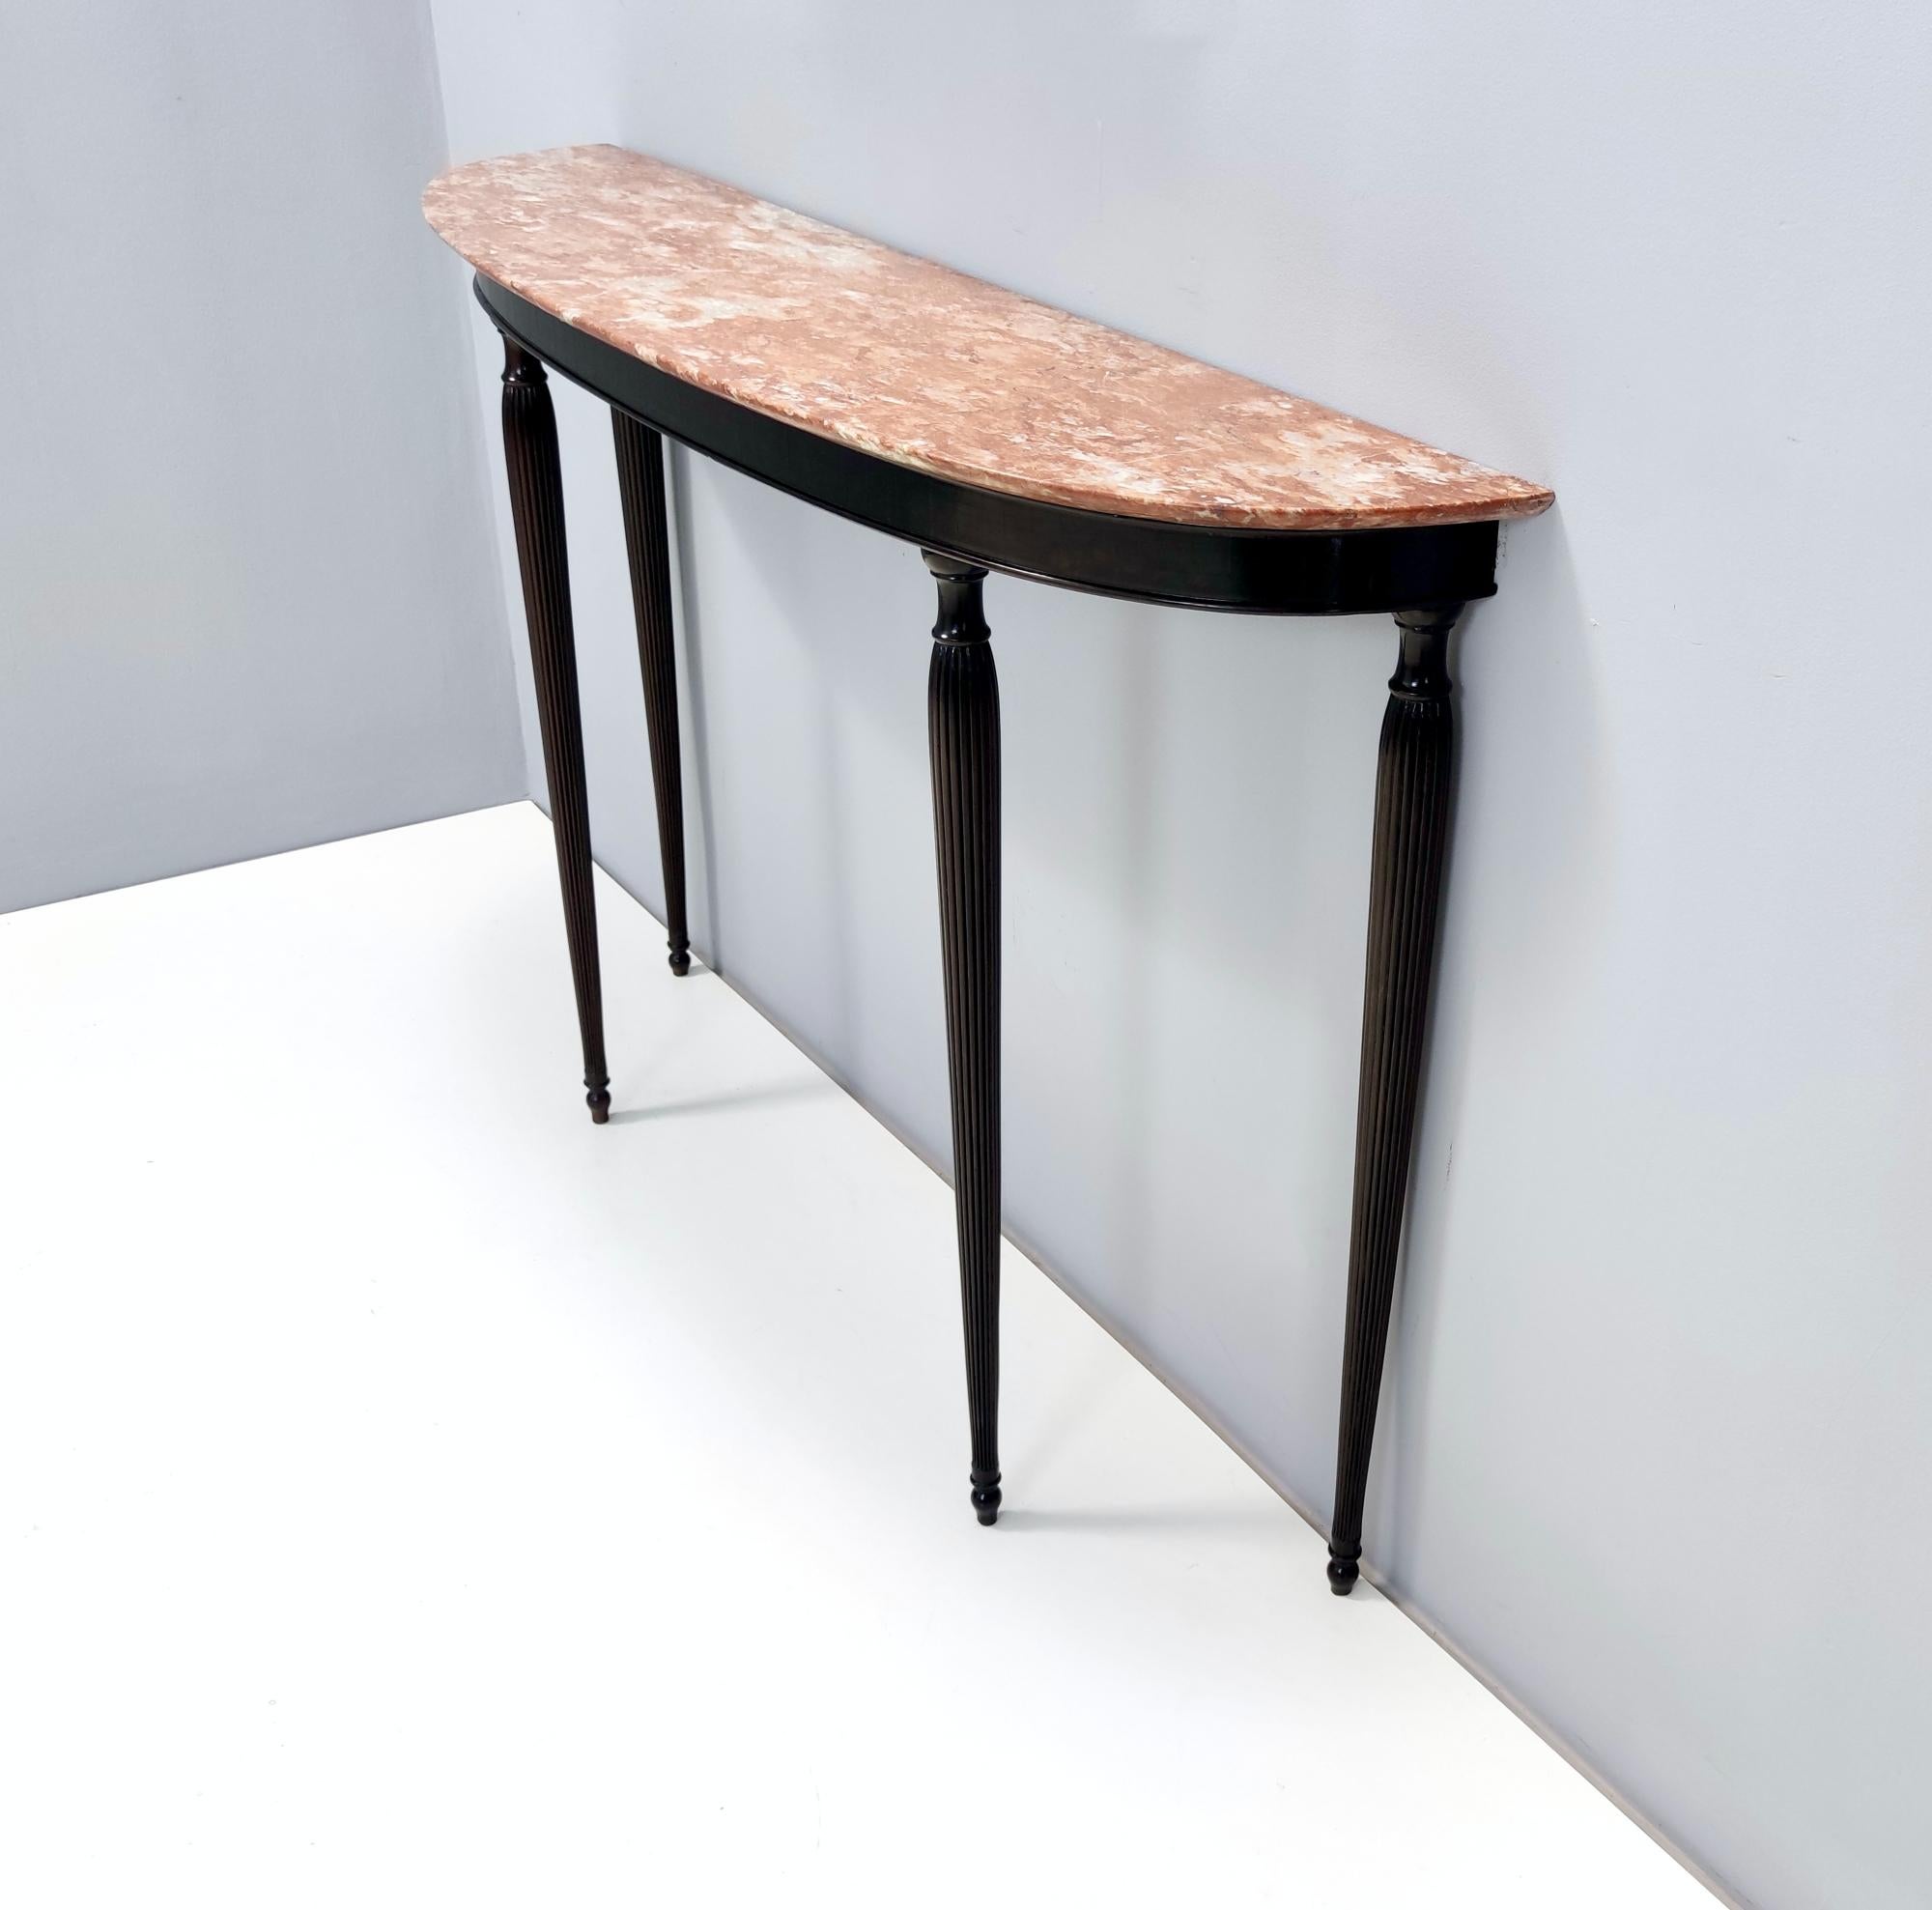 Vintage Ebonized Walnut Console Table with Red Travertine Marble Top, Italy 1